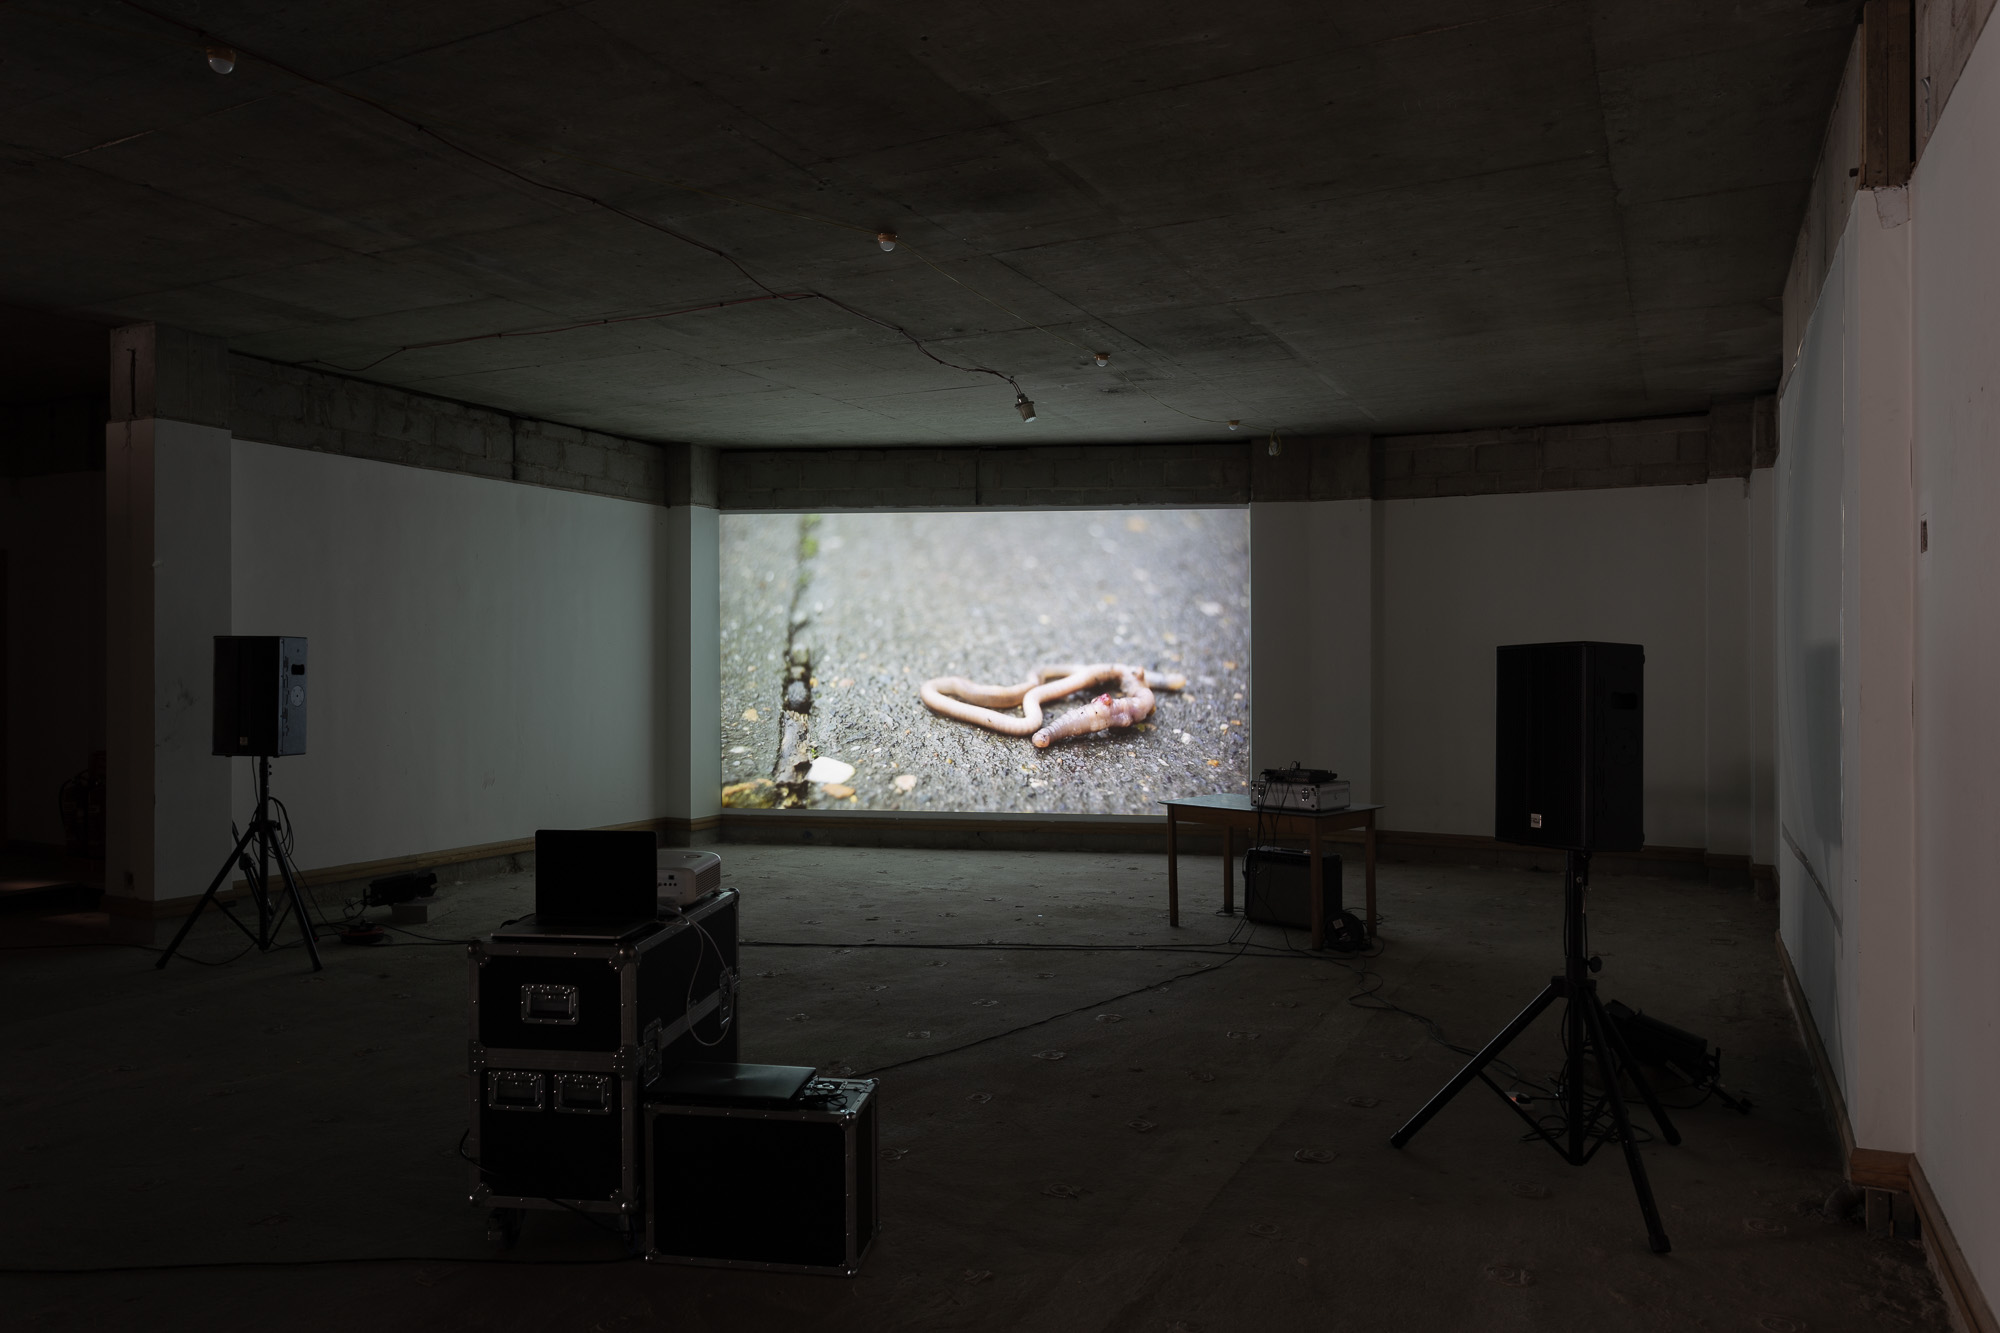 A view of a darkened room, with an artist's film projected on the back wall.